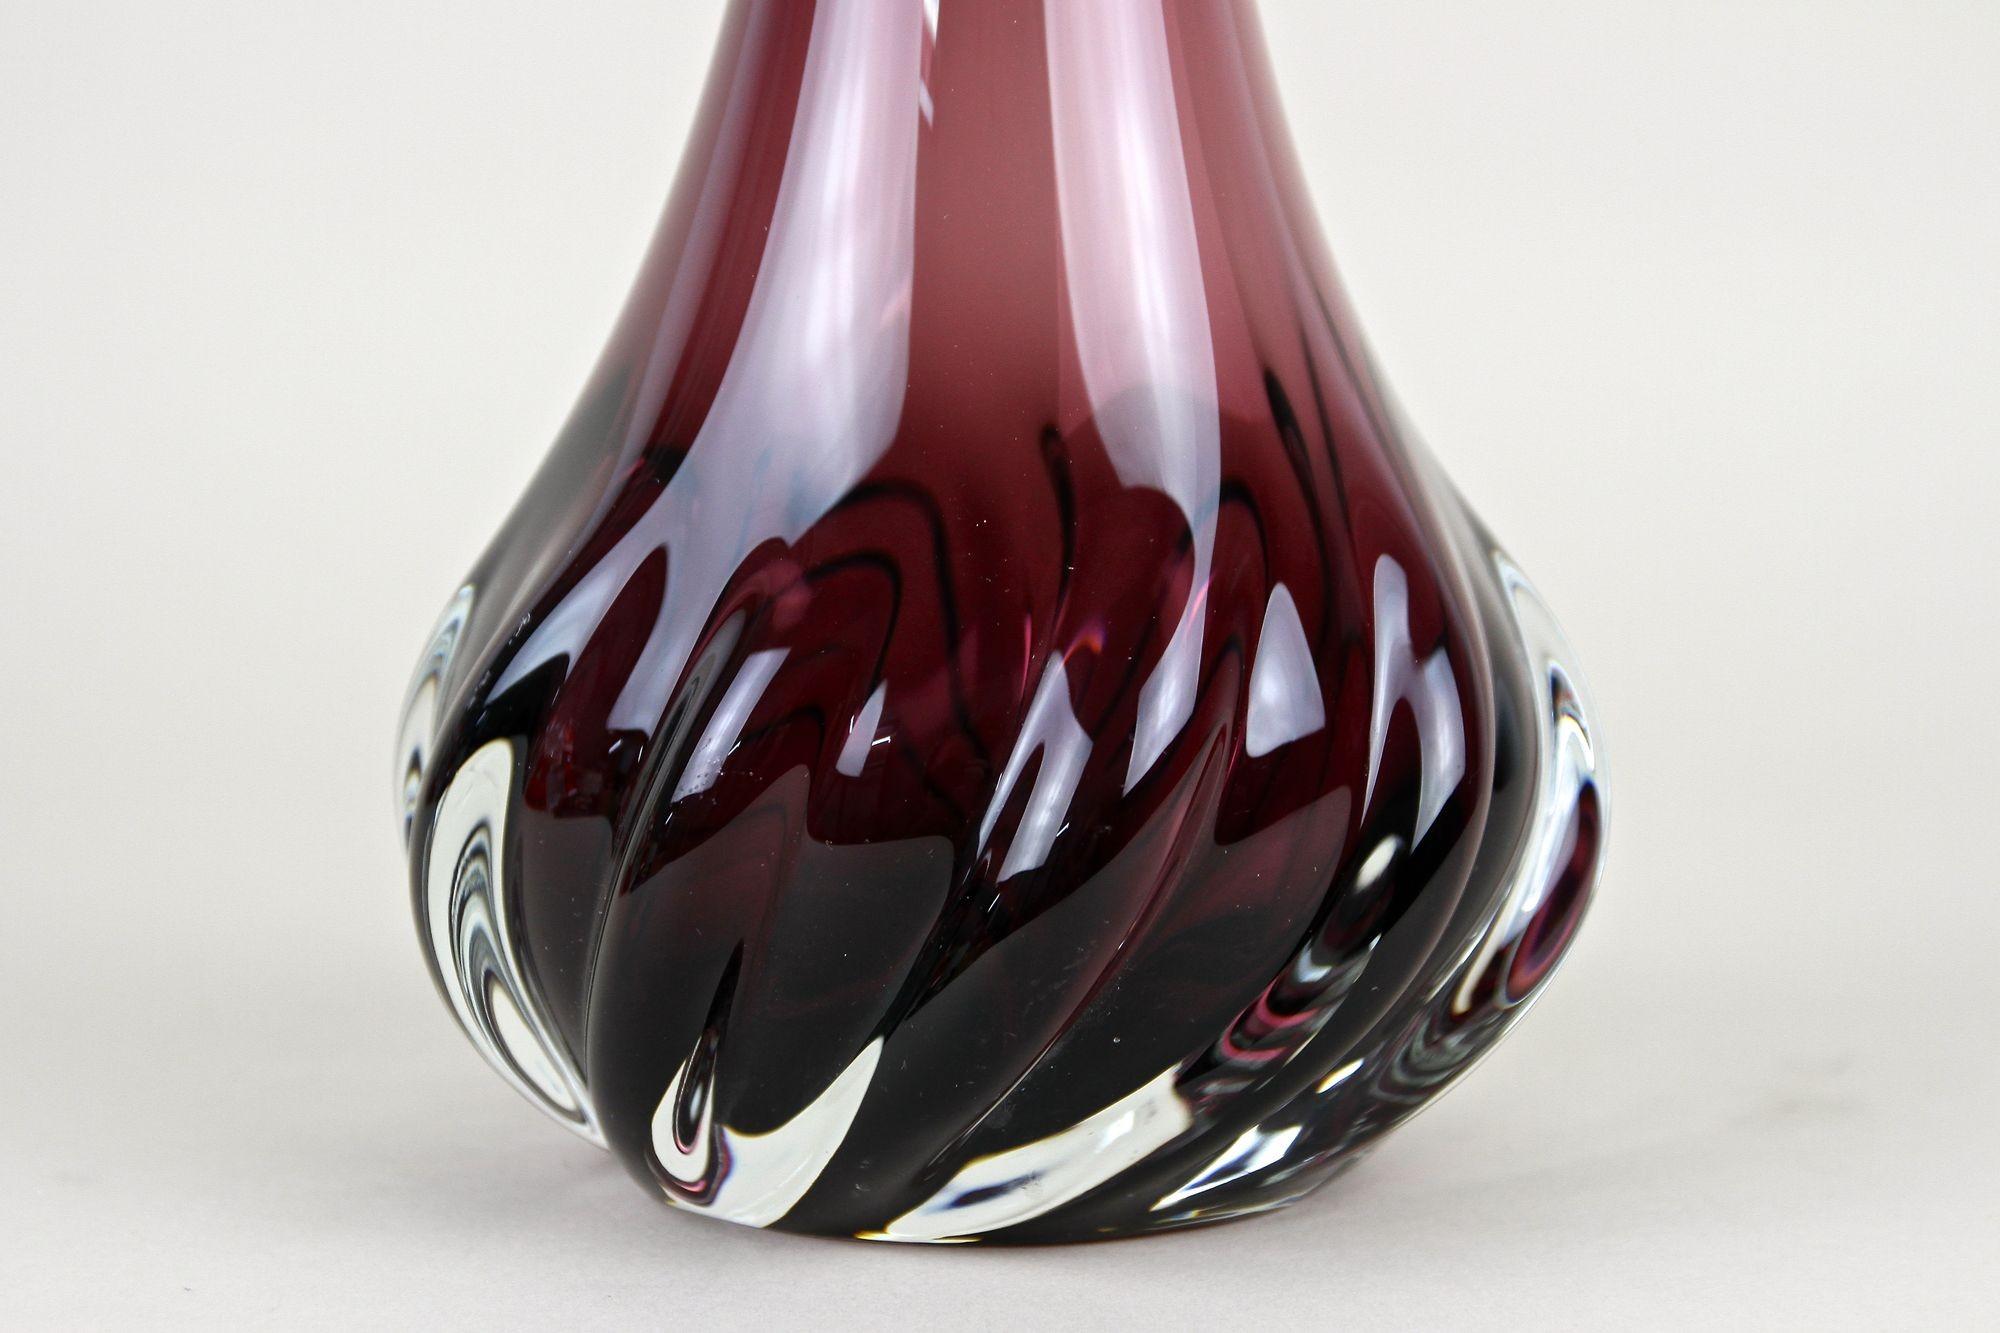 Bordeaux Red Murano Glass Long Neck Vase, 20th Century, Italy circa 1970 For Sale 3